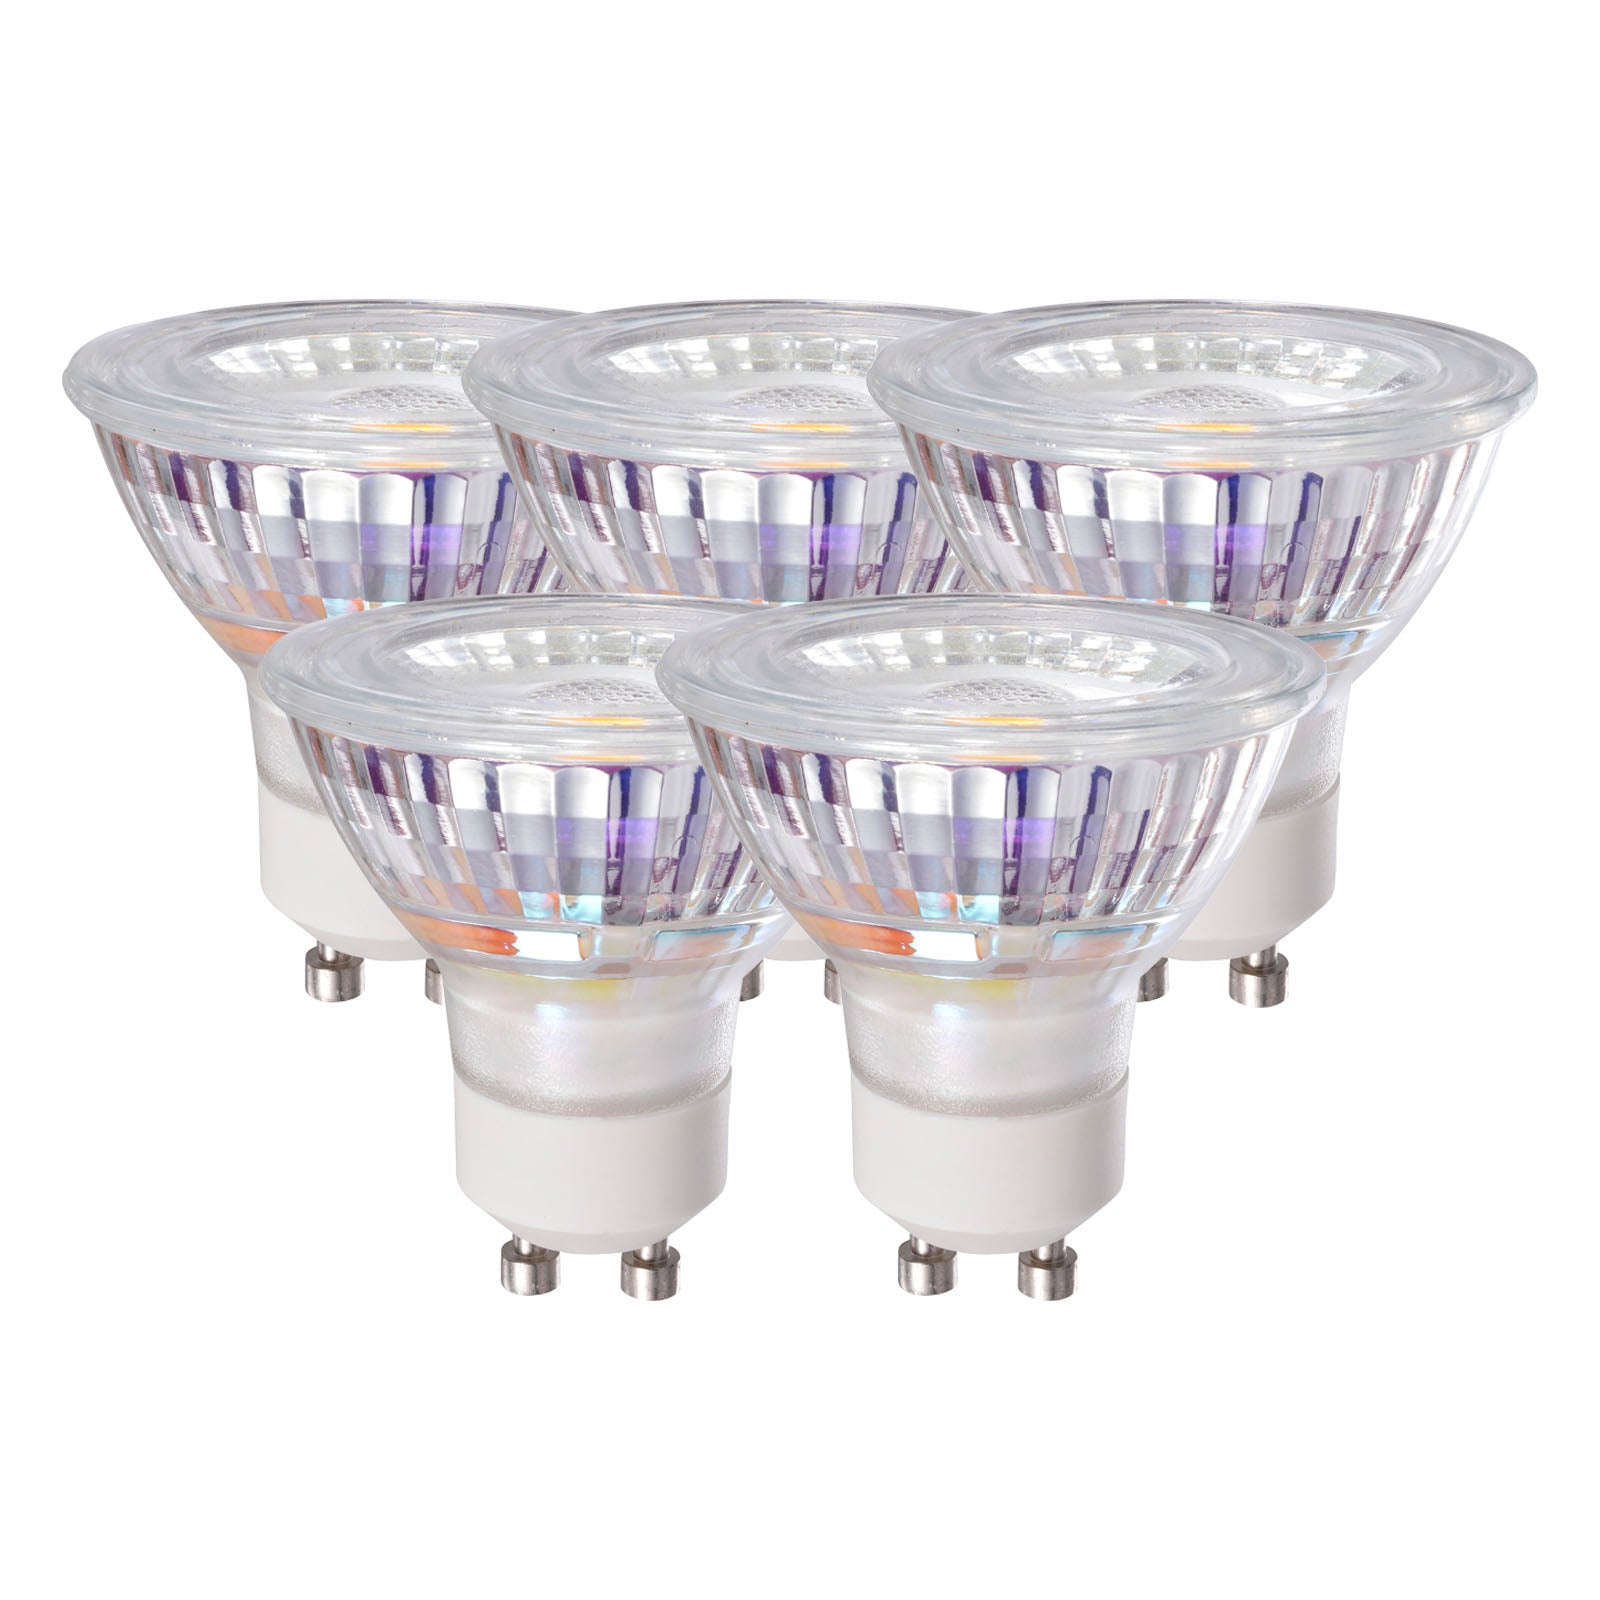 GU10 7 Watts LED Glass Bulbs, Warm White Dimmable Spot Lights, Pack of 5